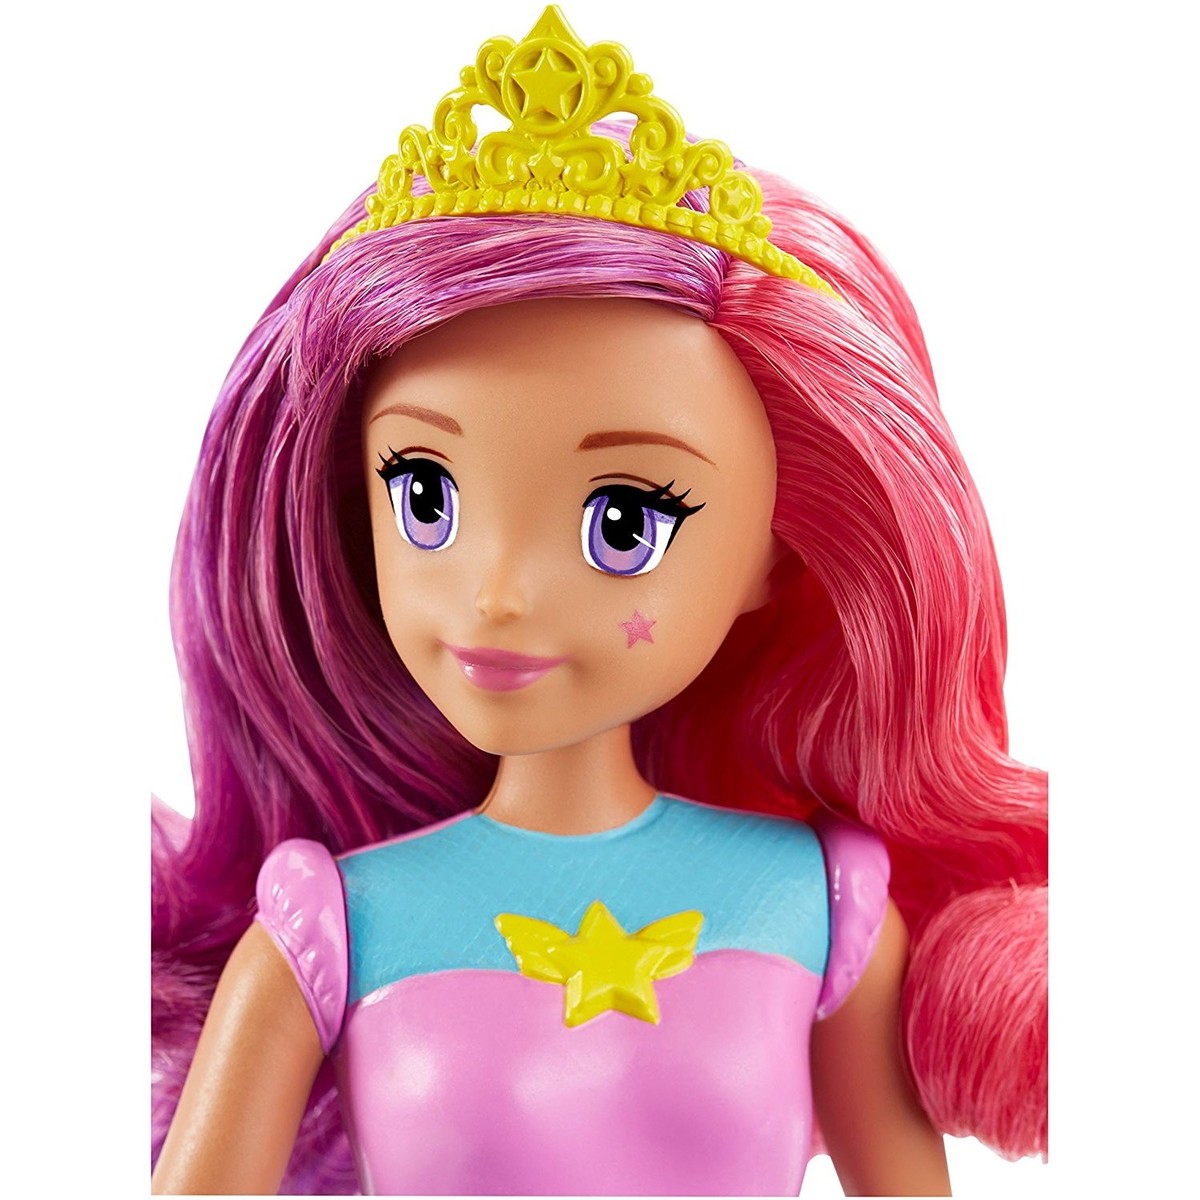 Barbie Video Game Hero Match Game Princess Doll, Pink DTW00